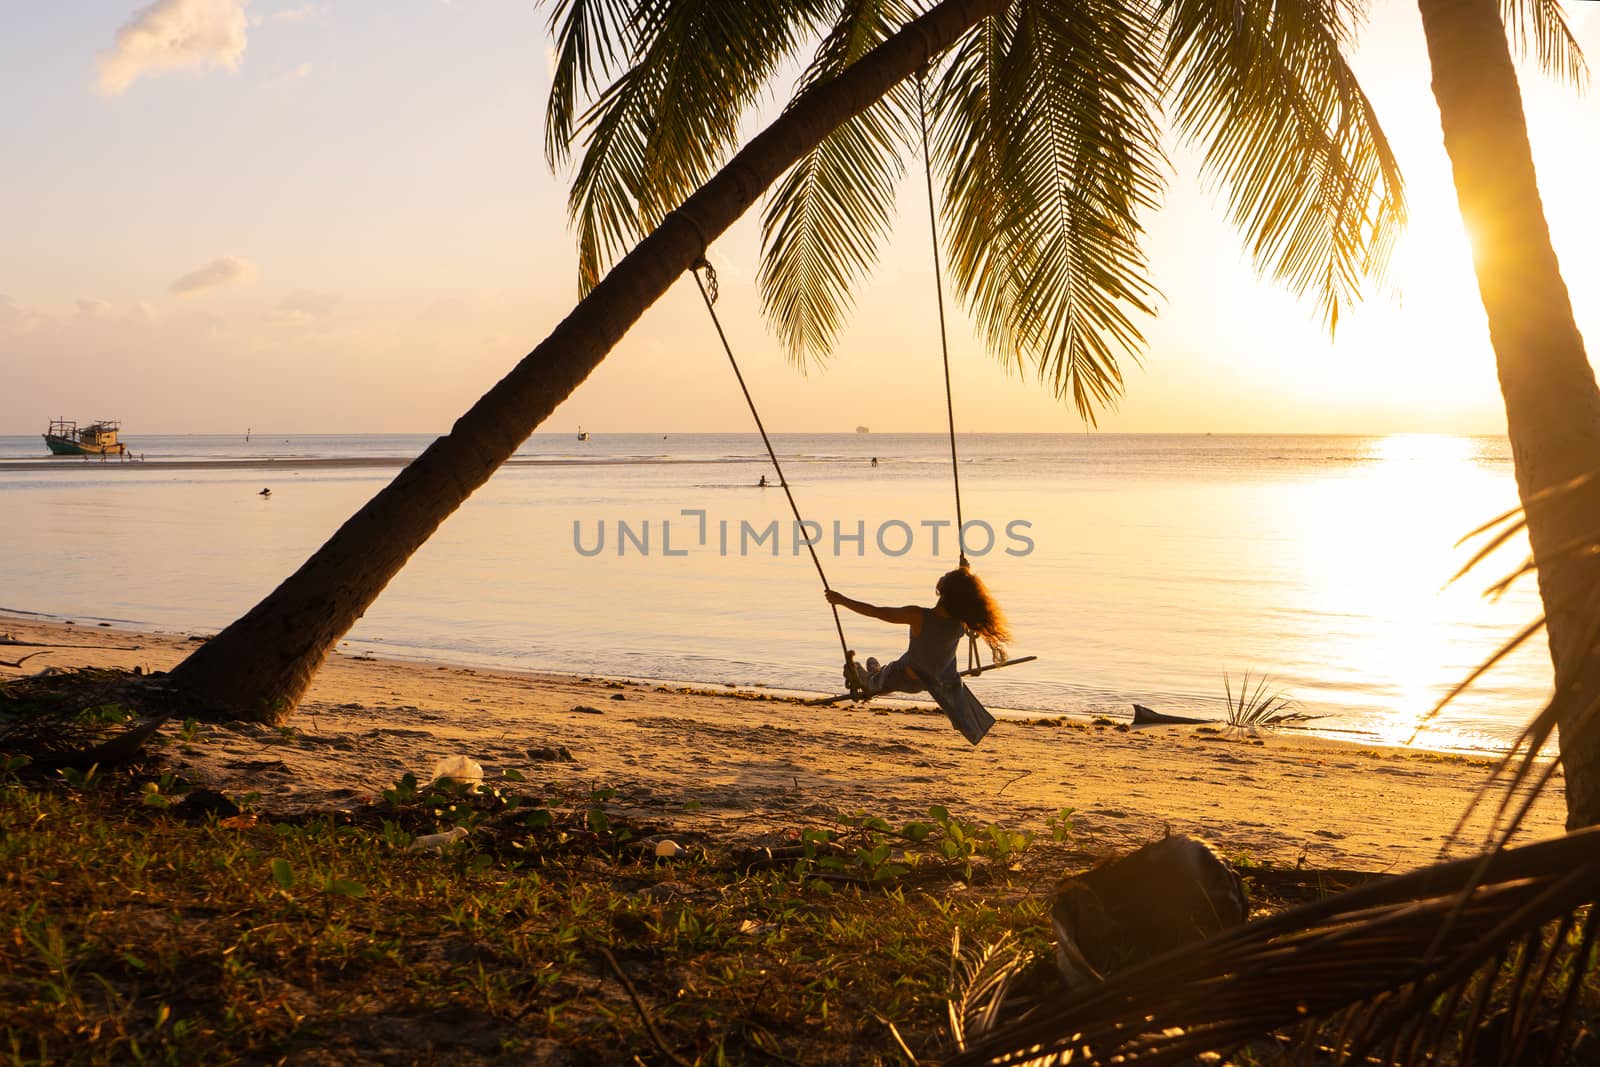 The girl on the beach rides on a swing during sunset. Sunset in the tropics, enjoying nature. Swing tied to a palm tree by the ocean by Try_my_best